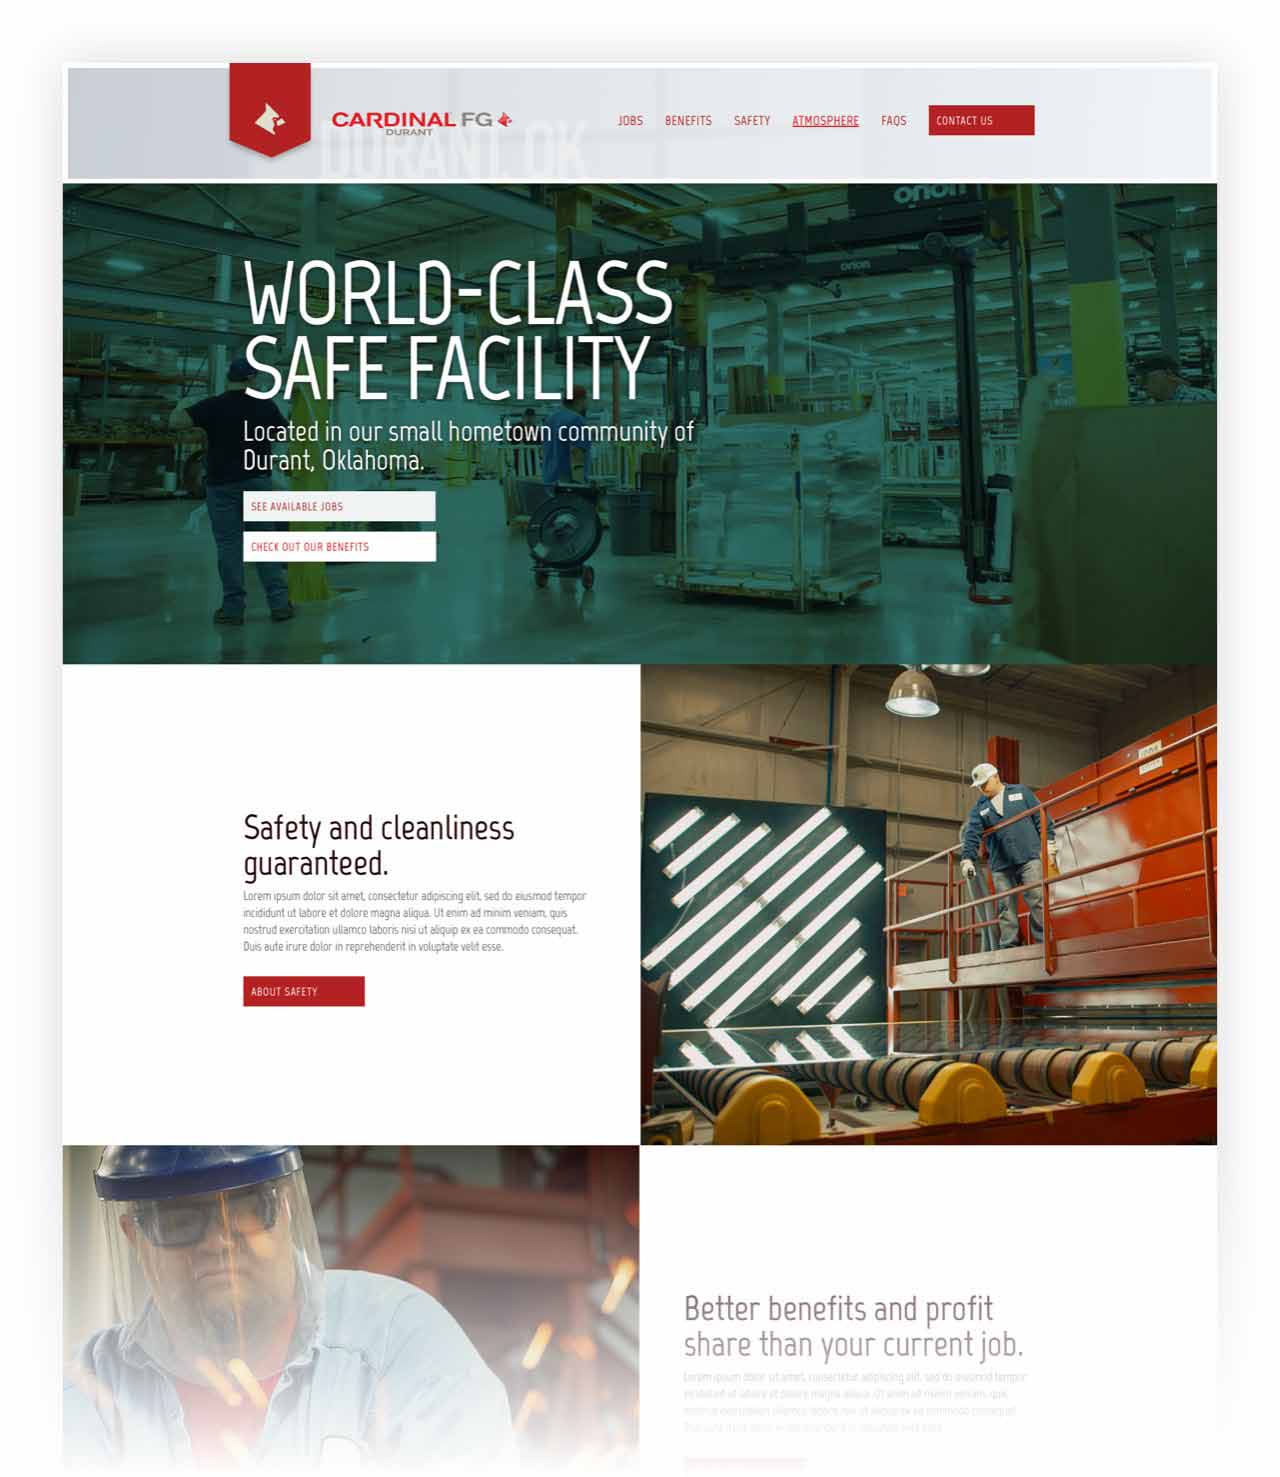 Example of hiring website in the manufacturing industry